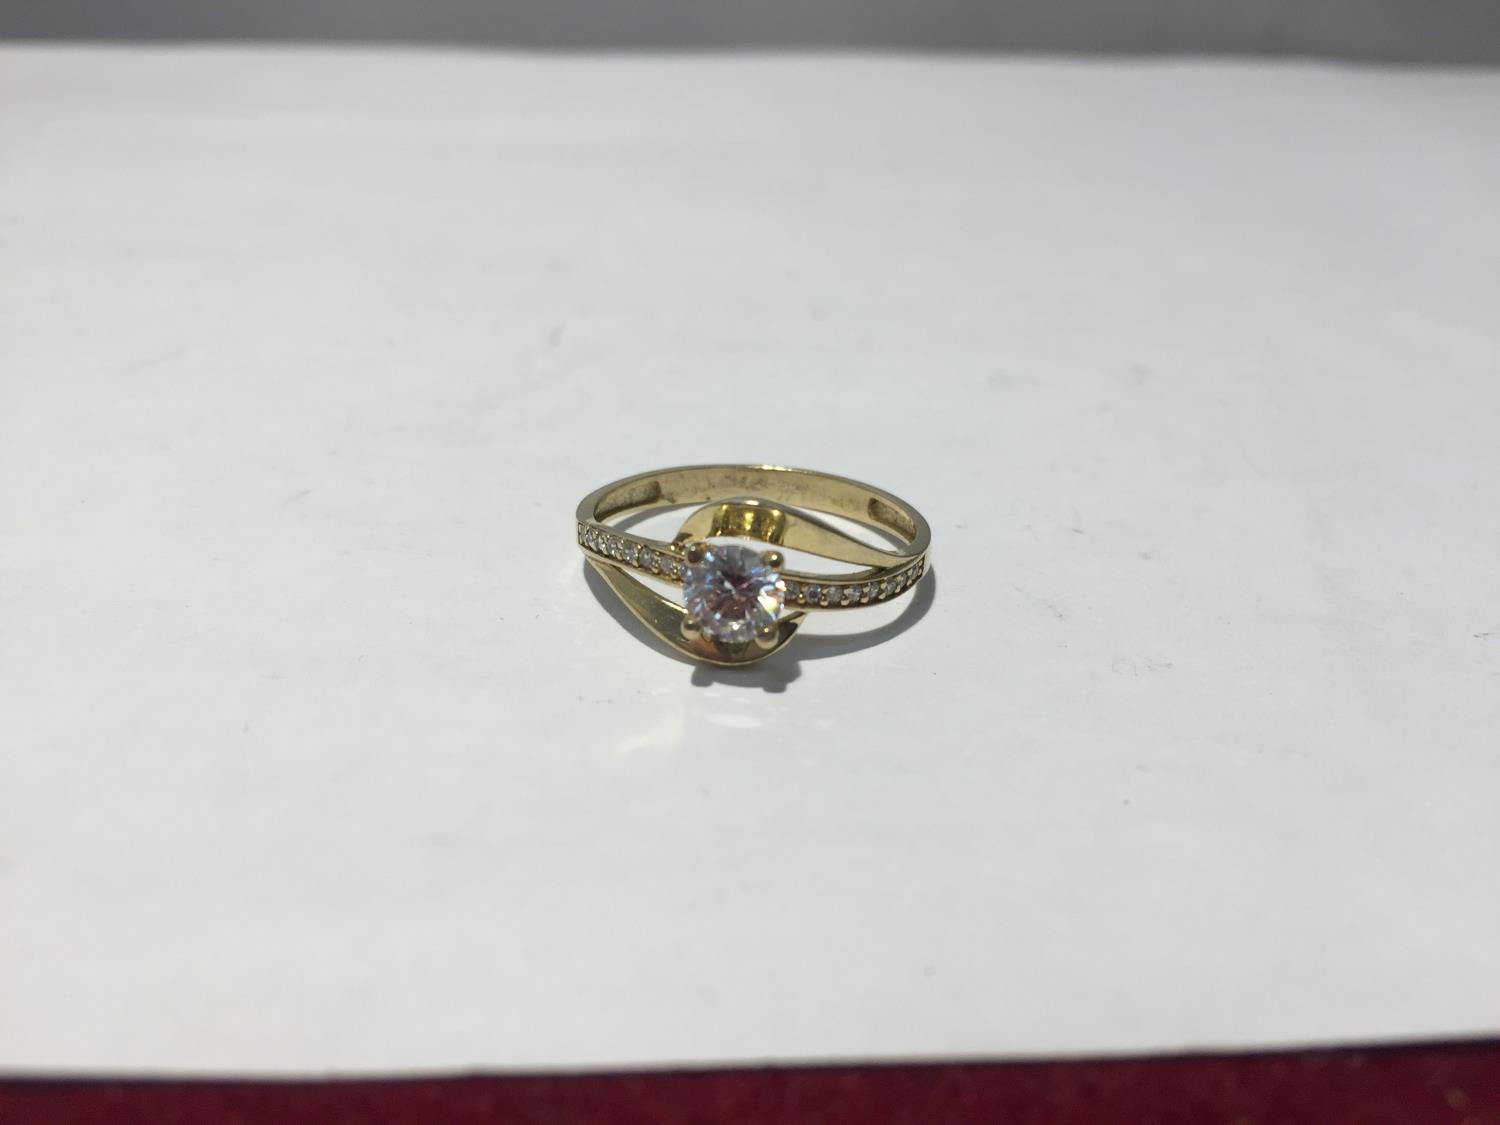 A 9 CARAT GOLD RING WITH A CLEAR STONE SOLITAIRE AND CLEAR STONES ON THE SHOULDERS WITH PRESENTATION - Image 4 of 4